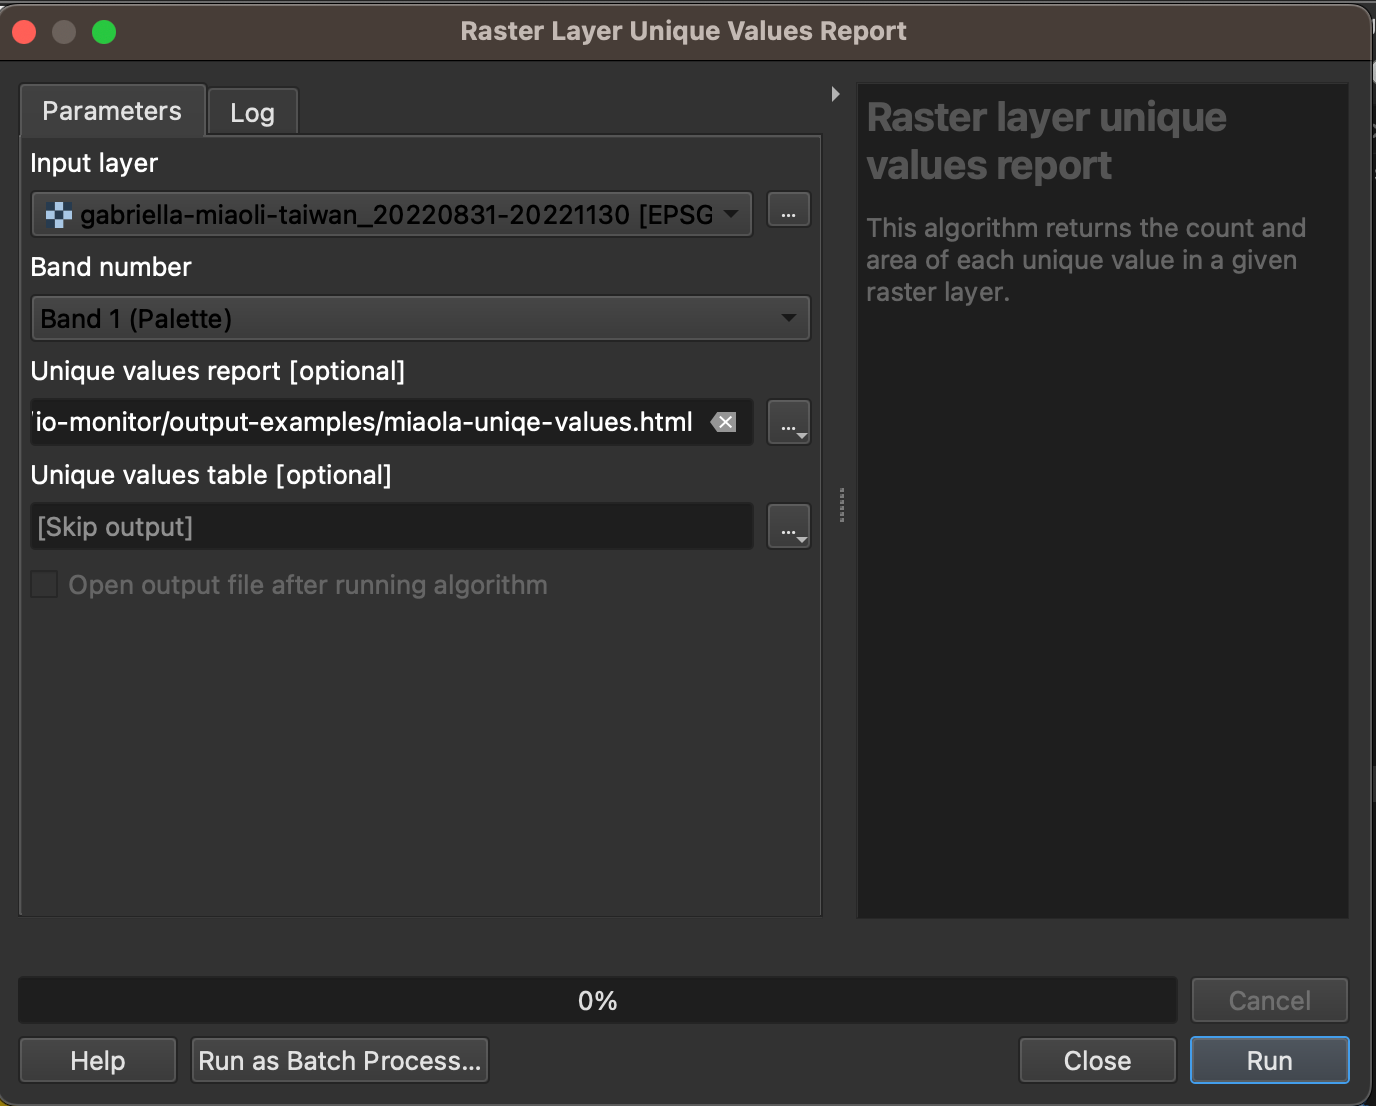 This is a sample image of the raster layer unique values in
QGIS.